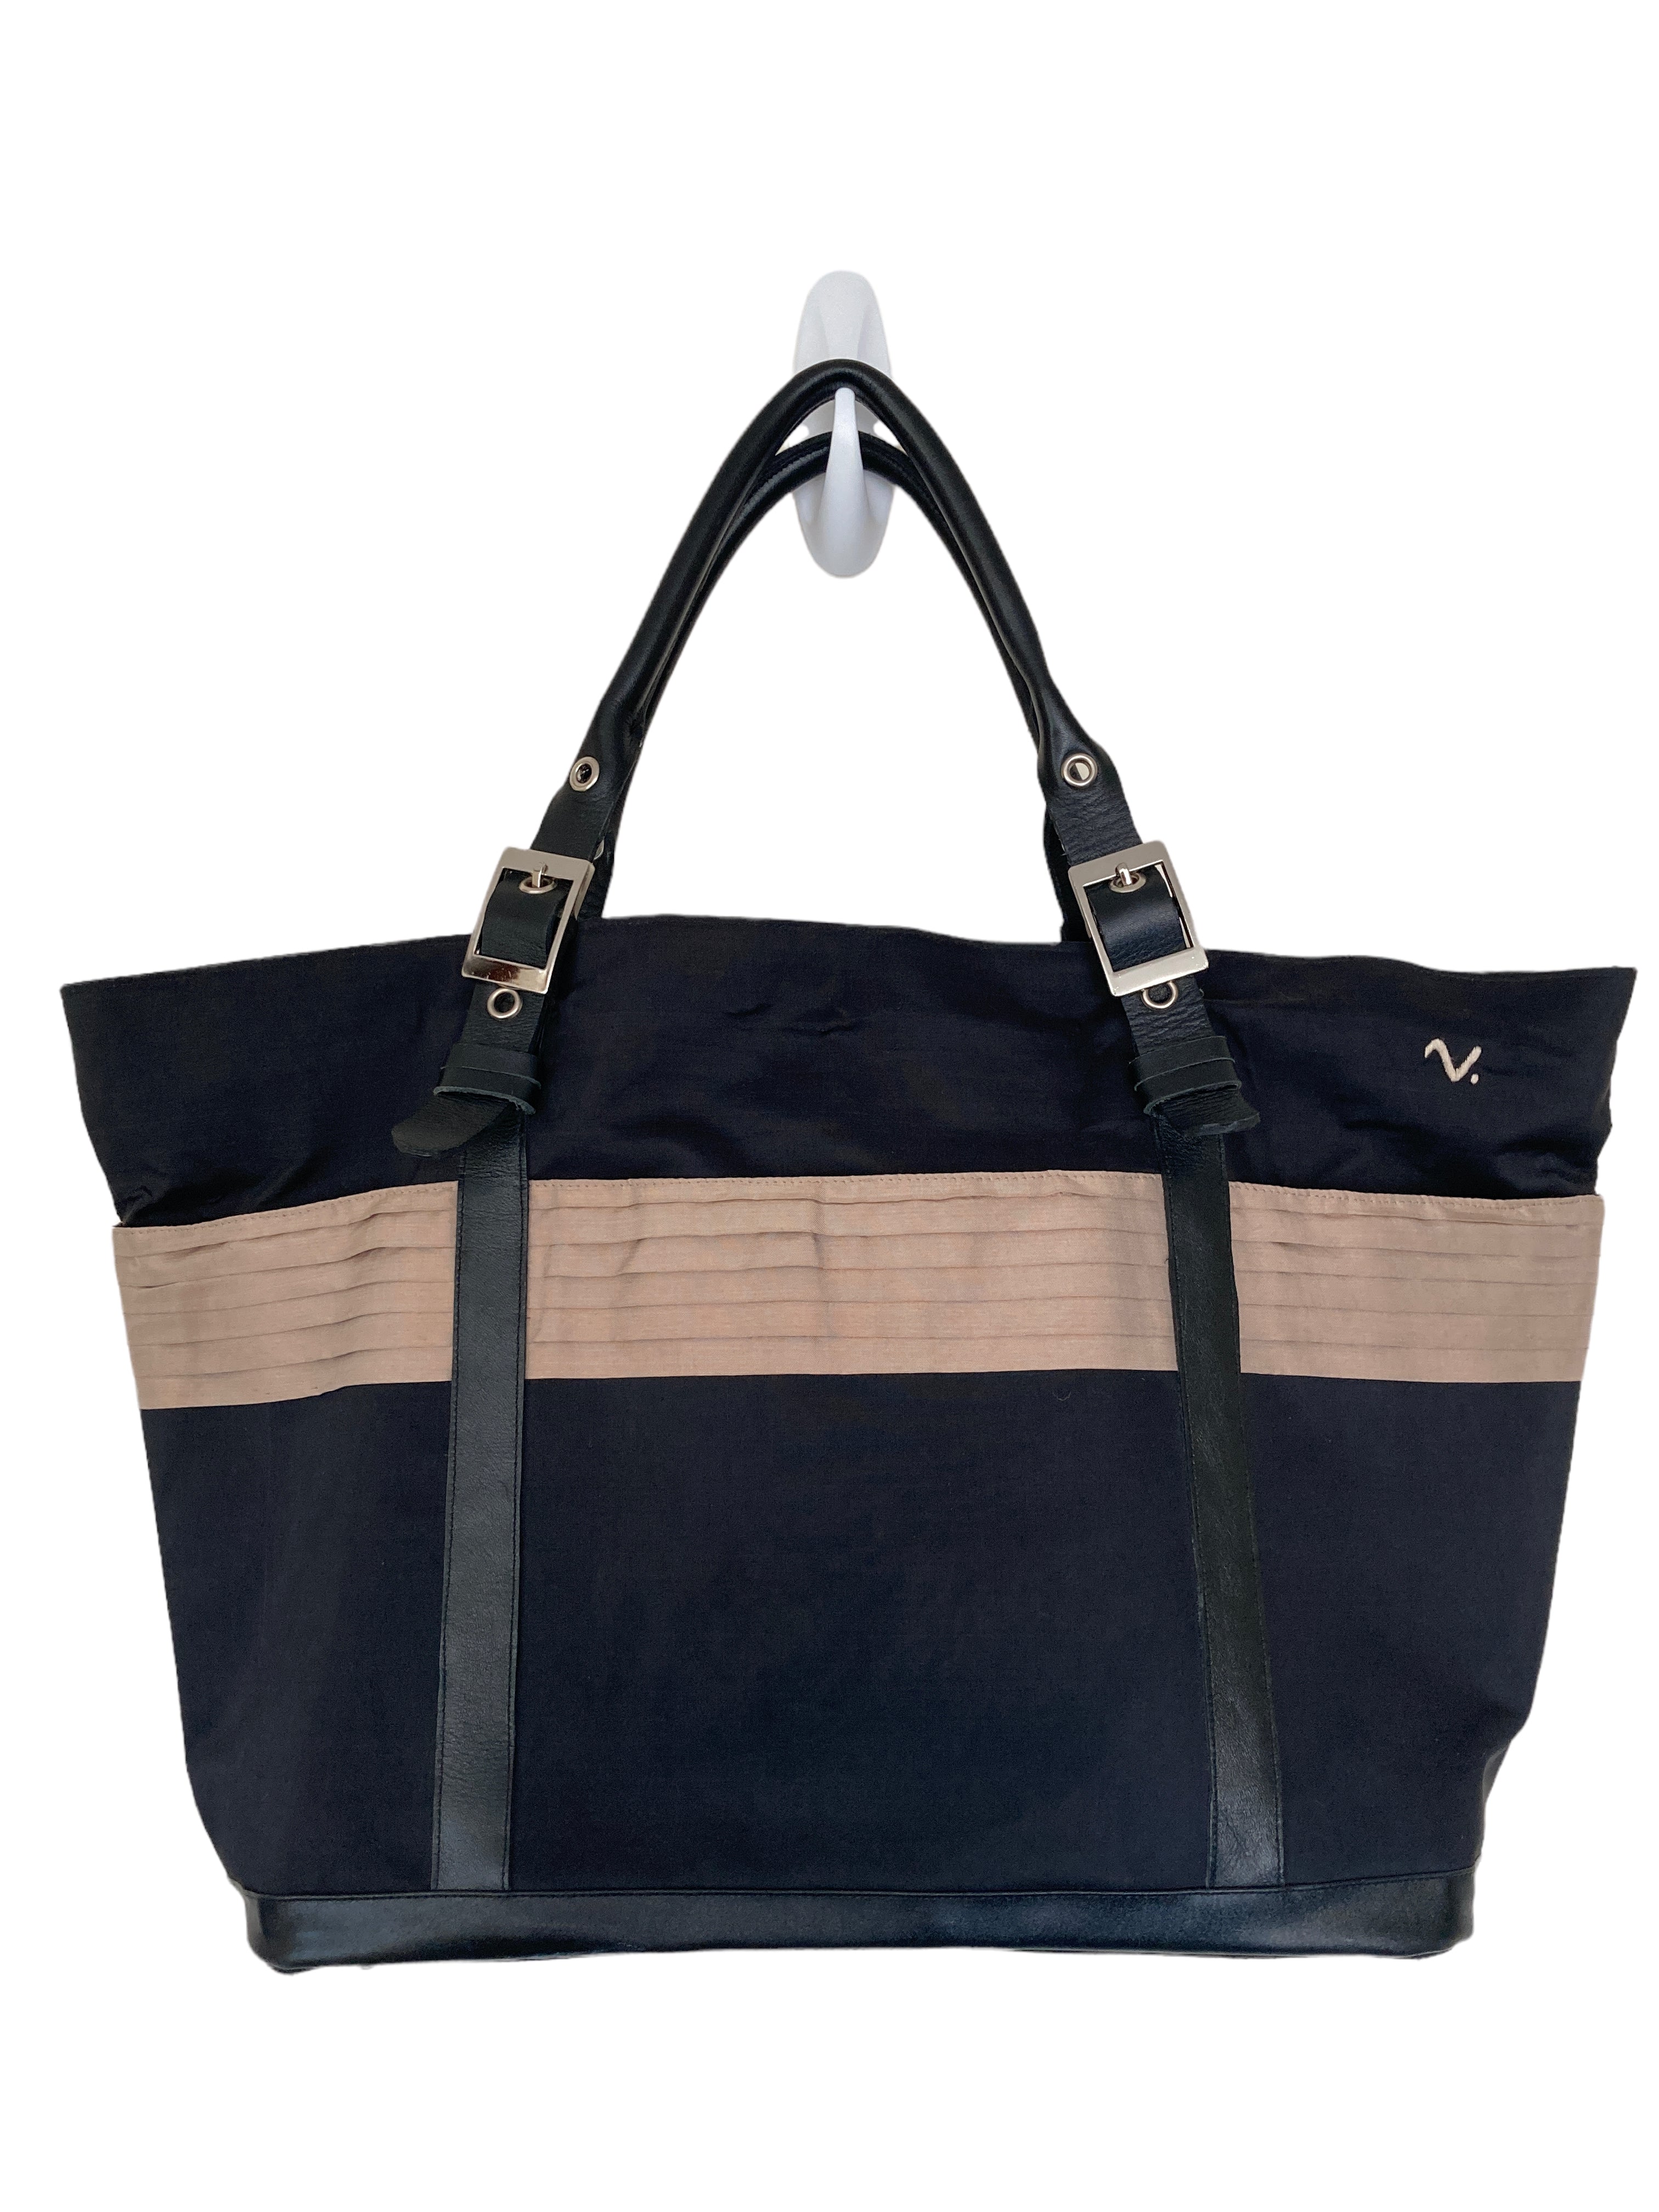 Clare V. Black/Taupe Silk and Leather Tote – Second Serve